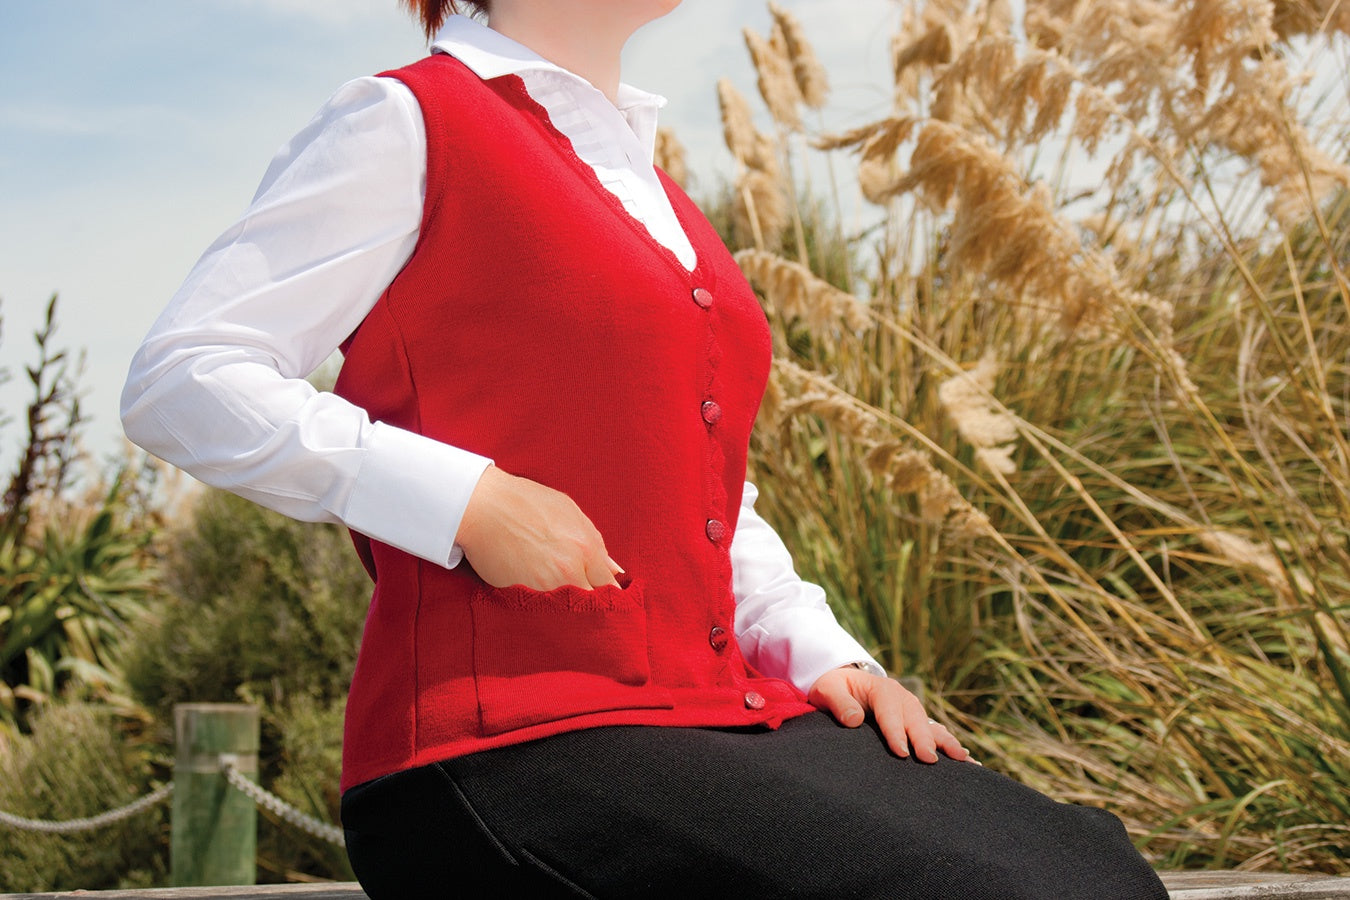 Red Gorgeous 100% Merino AOK Clothing Sleeveless Cardigan. The perfect cardi to take you from Summer to Autumn. The lace trim V neck button vest is fabulous for wearing over blouses and it also features two handy pockets at the front.